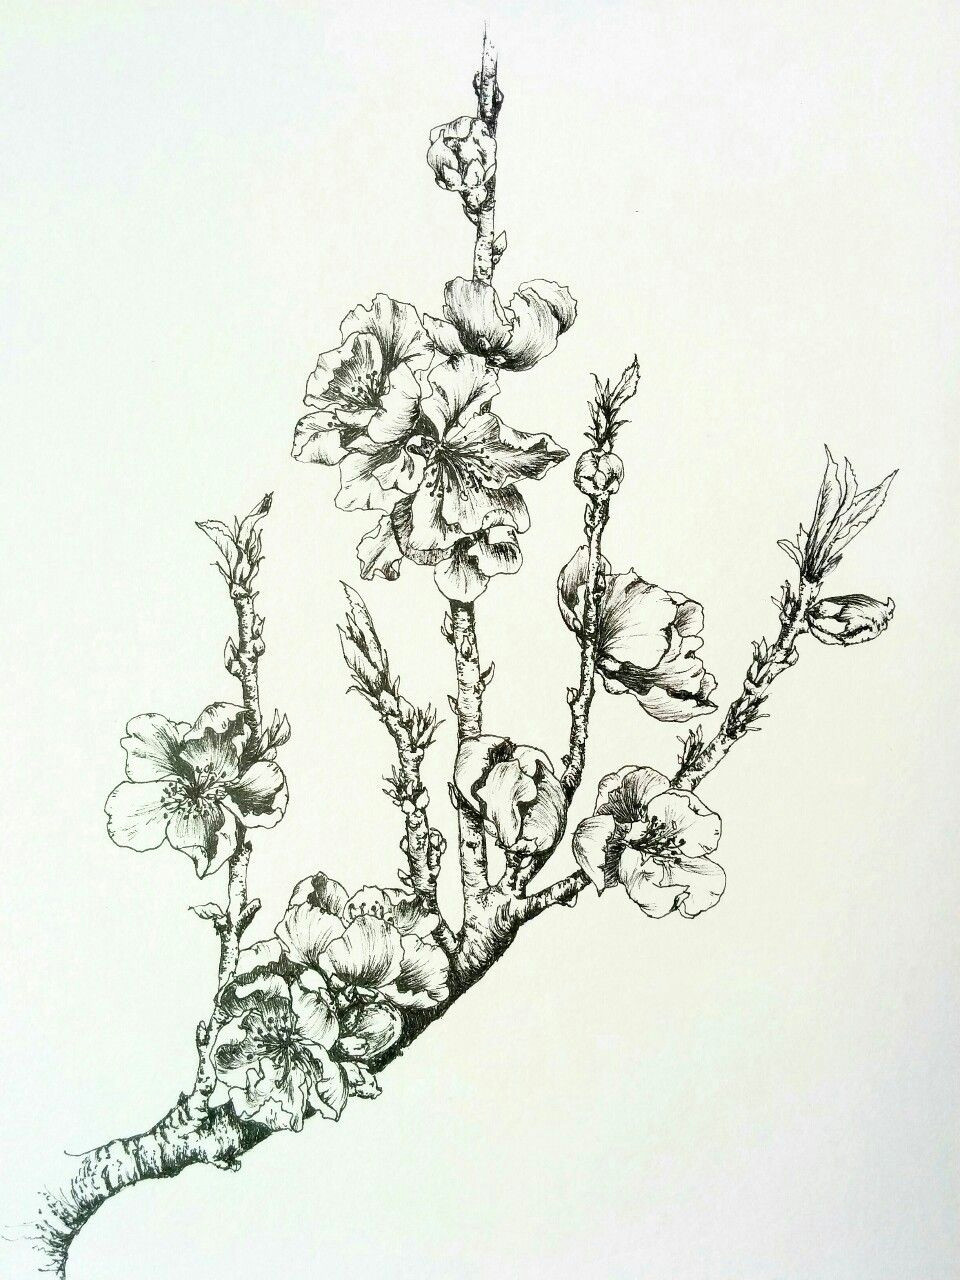 Drawings Of Flowers Pen Nectarine Blossoms Lots Of Flower Buds at the Moment Hoping for A